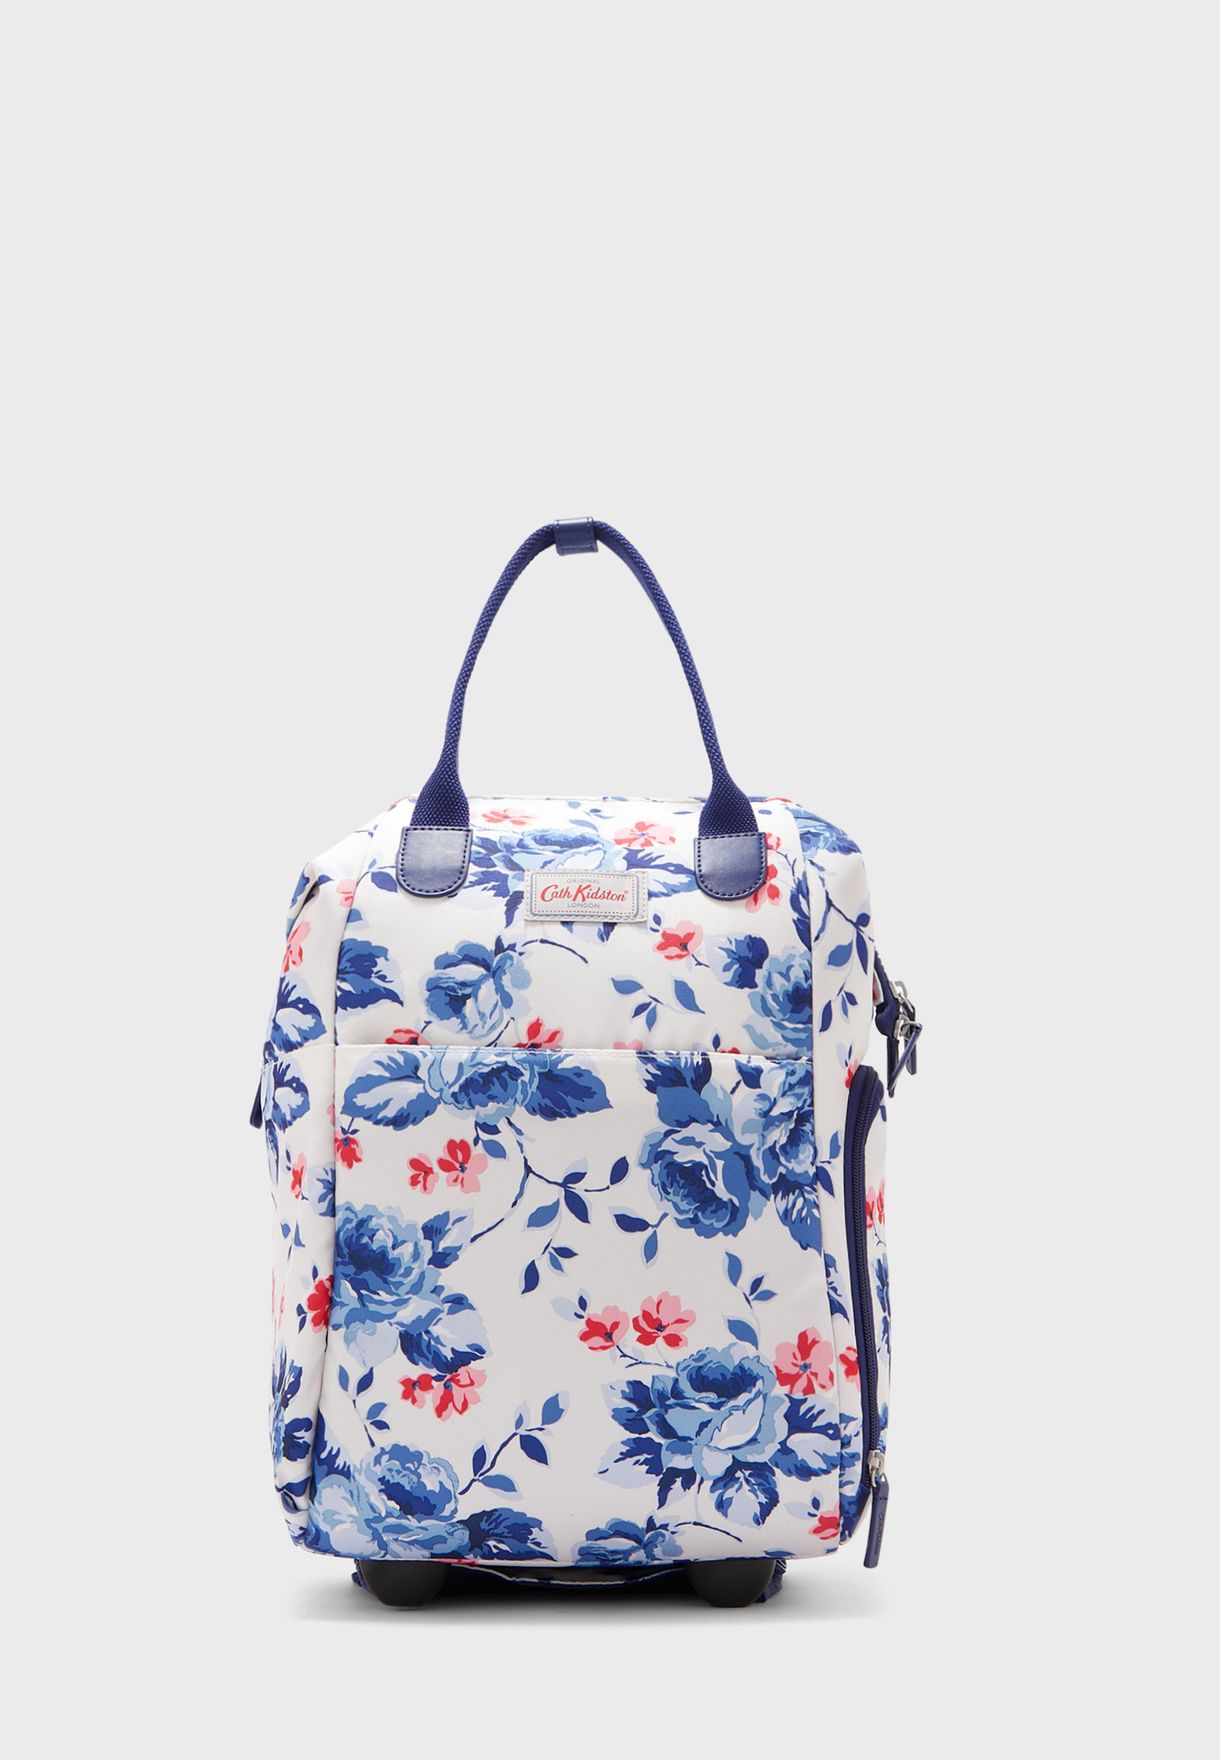 cath kidston backpack with wheels